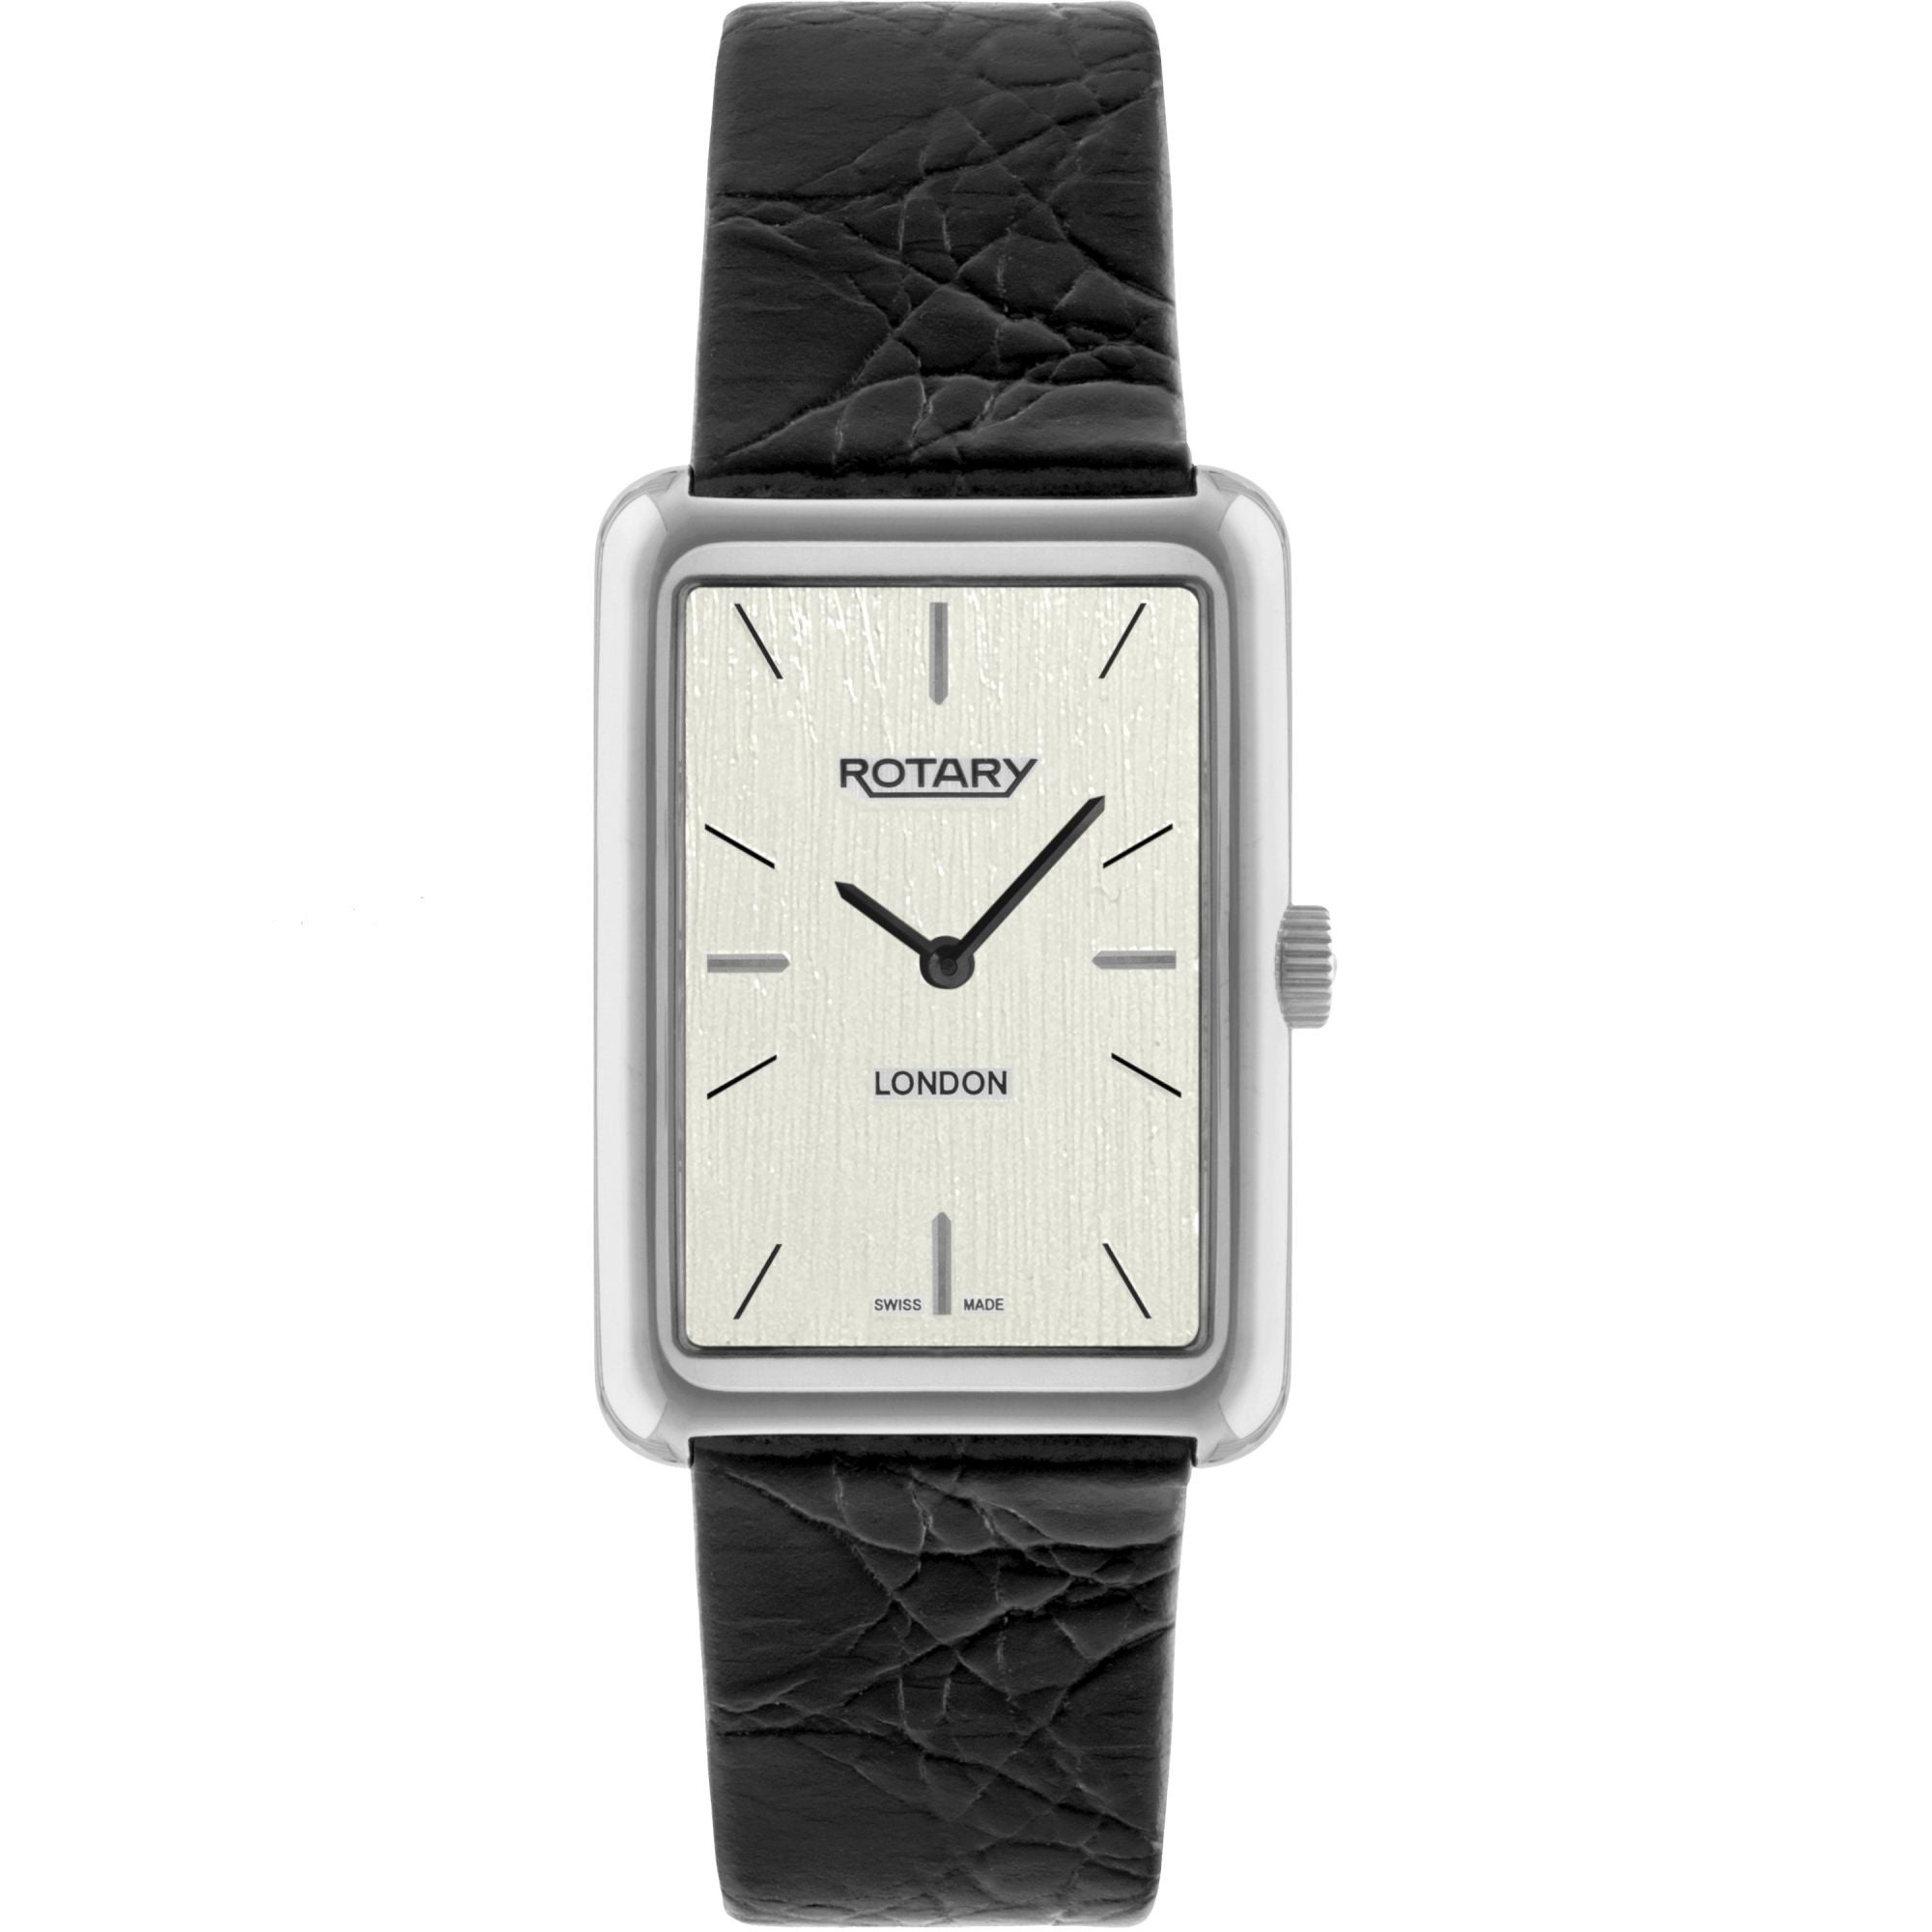 Rotary Mens Timepieces London Steel Black Leather Strap Watch GS90989/32 - Robert Openshaw Fine Jewellery